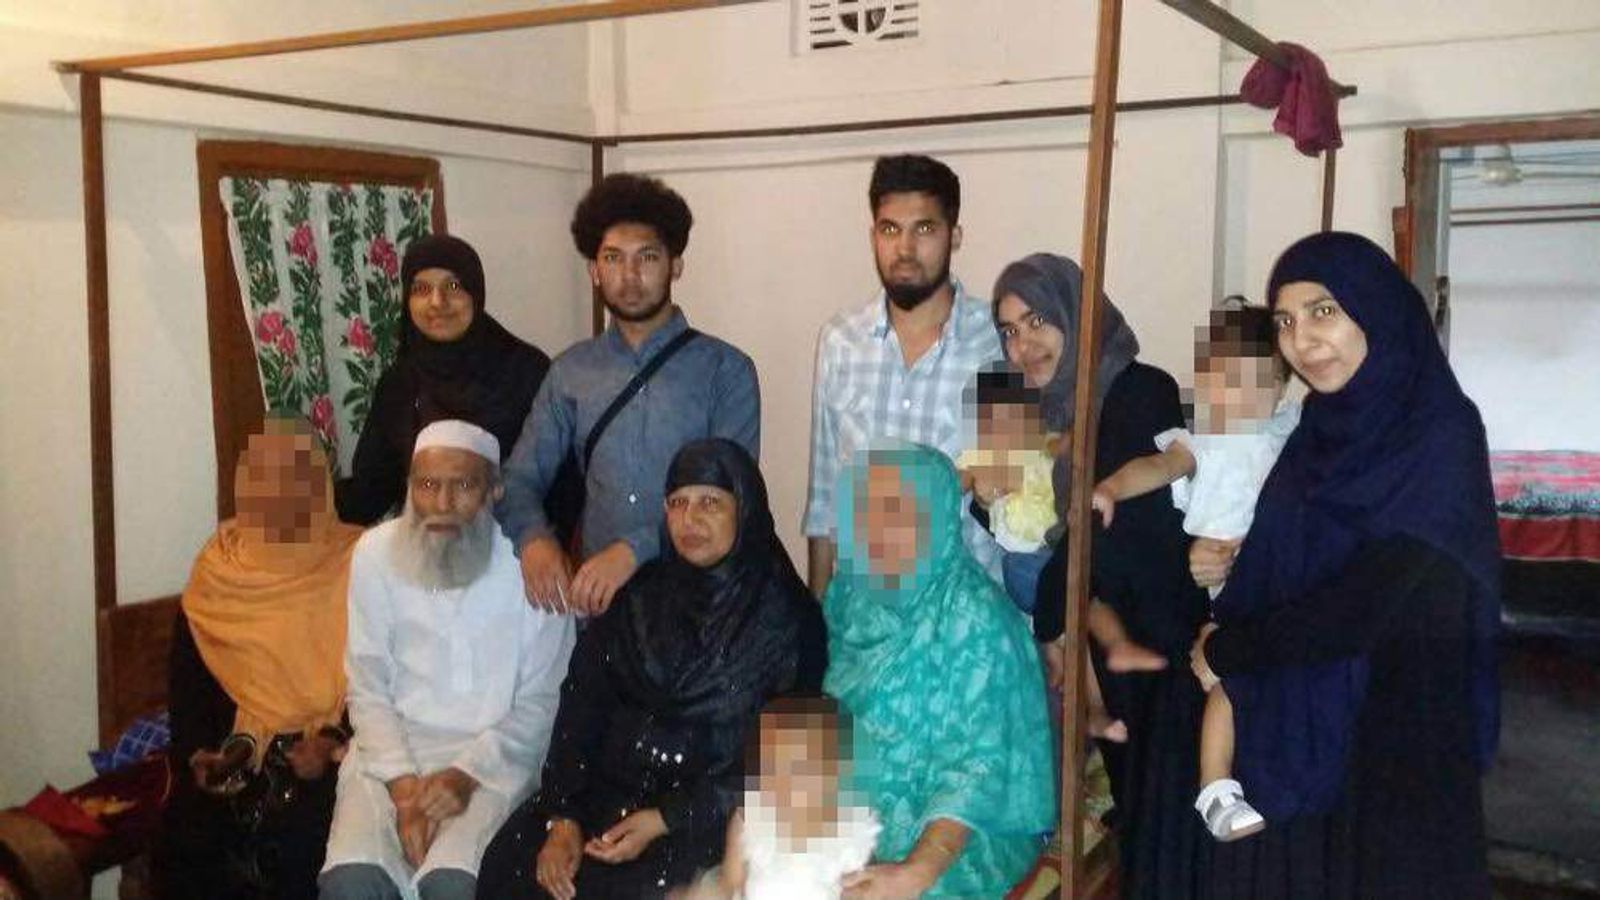 British family of 12 suspected of joining Islamic State 'all die in Syria'